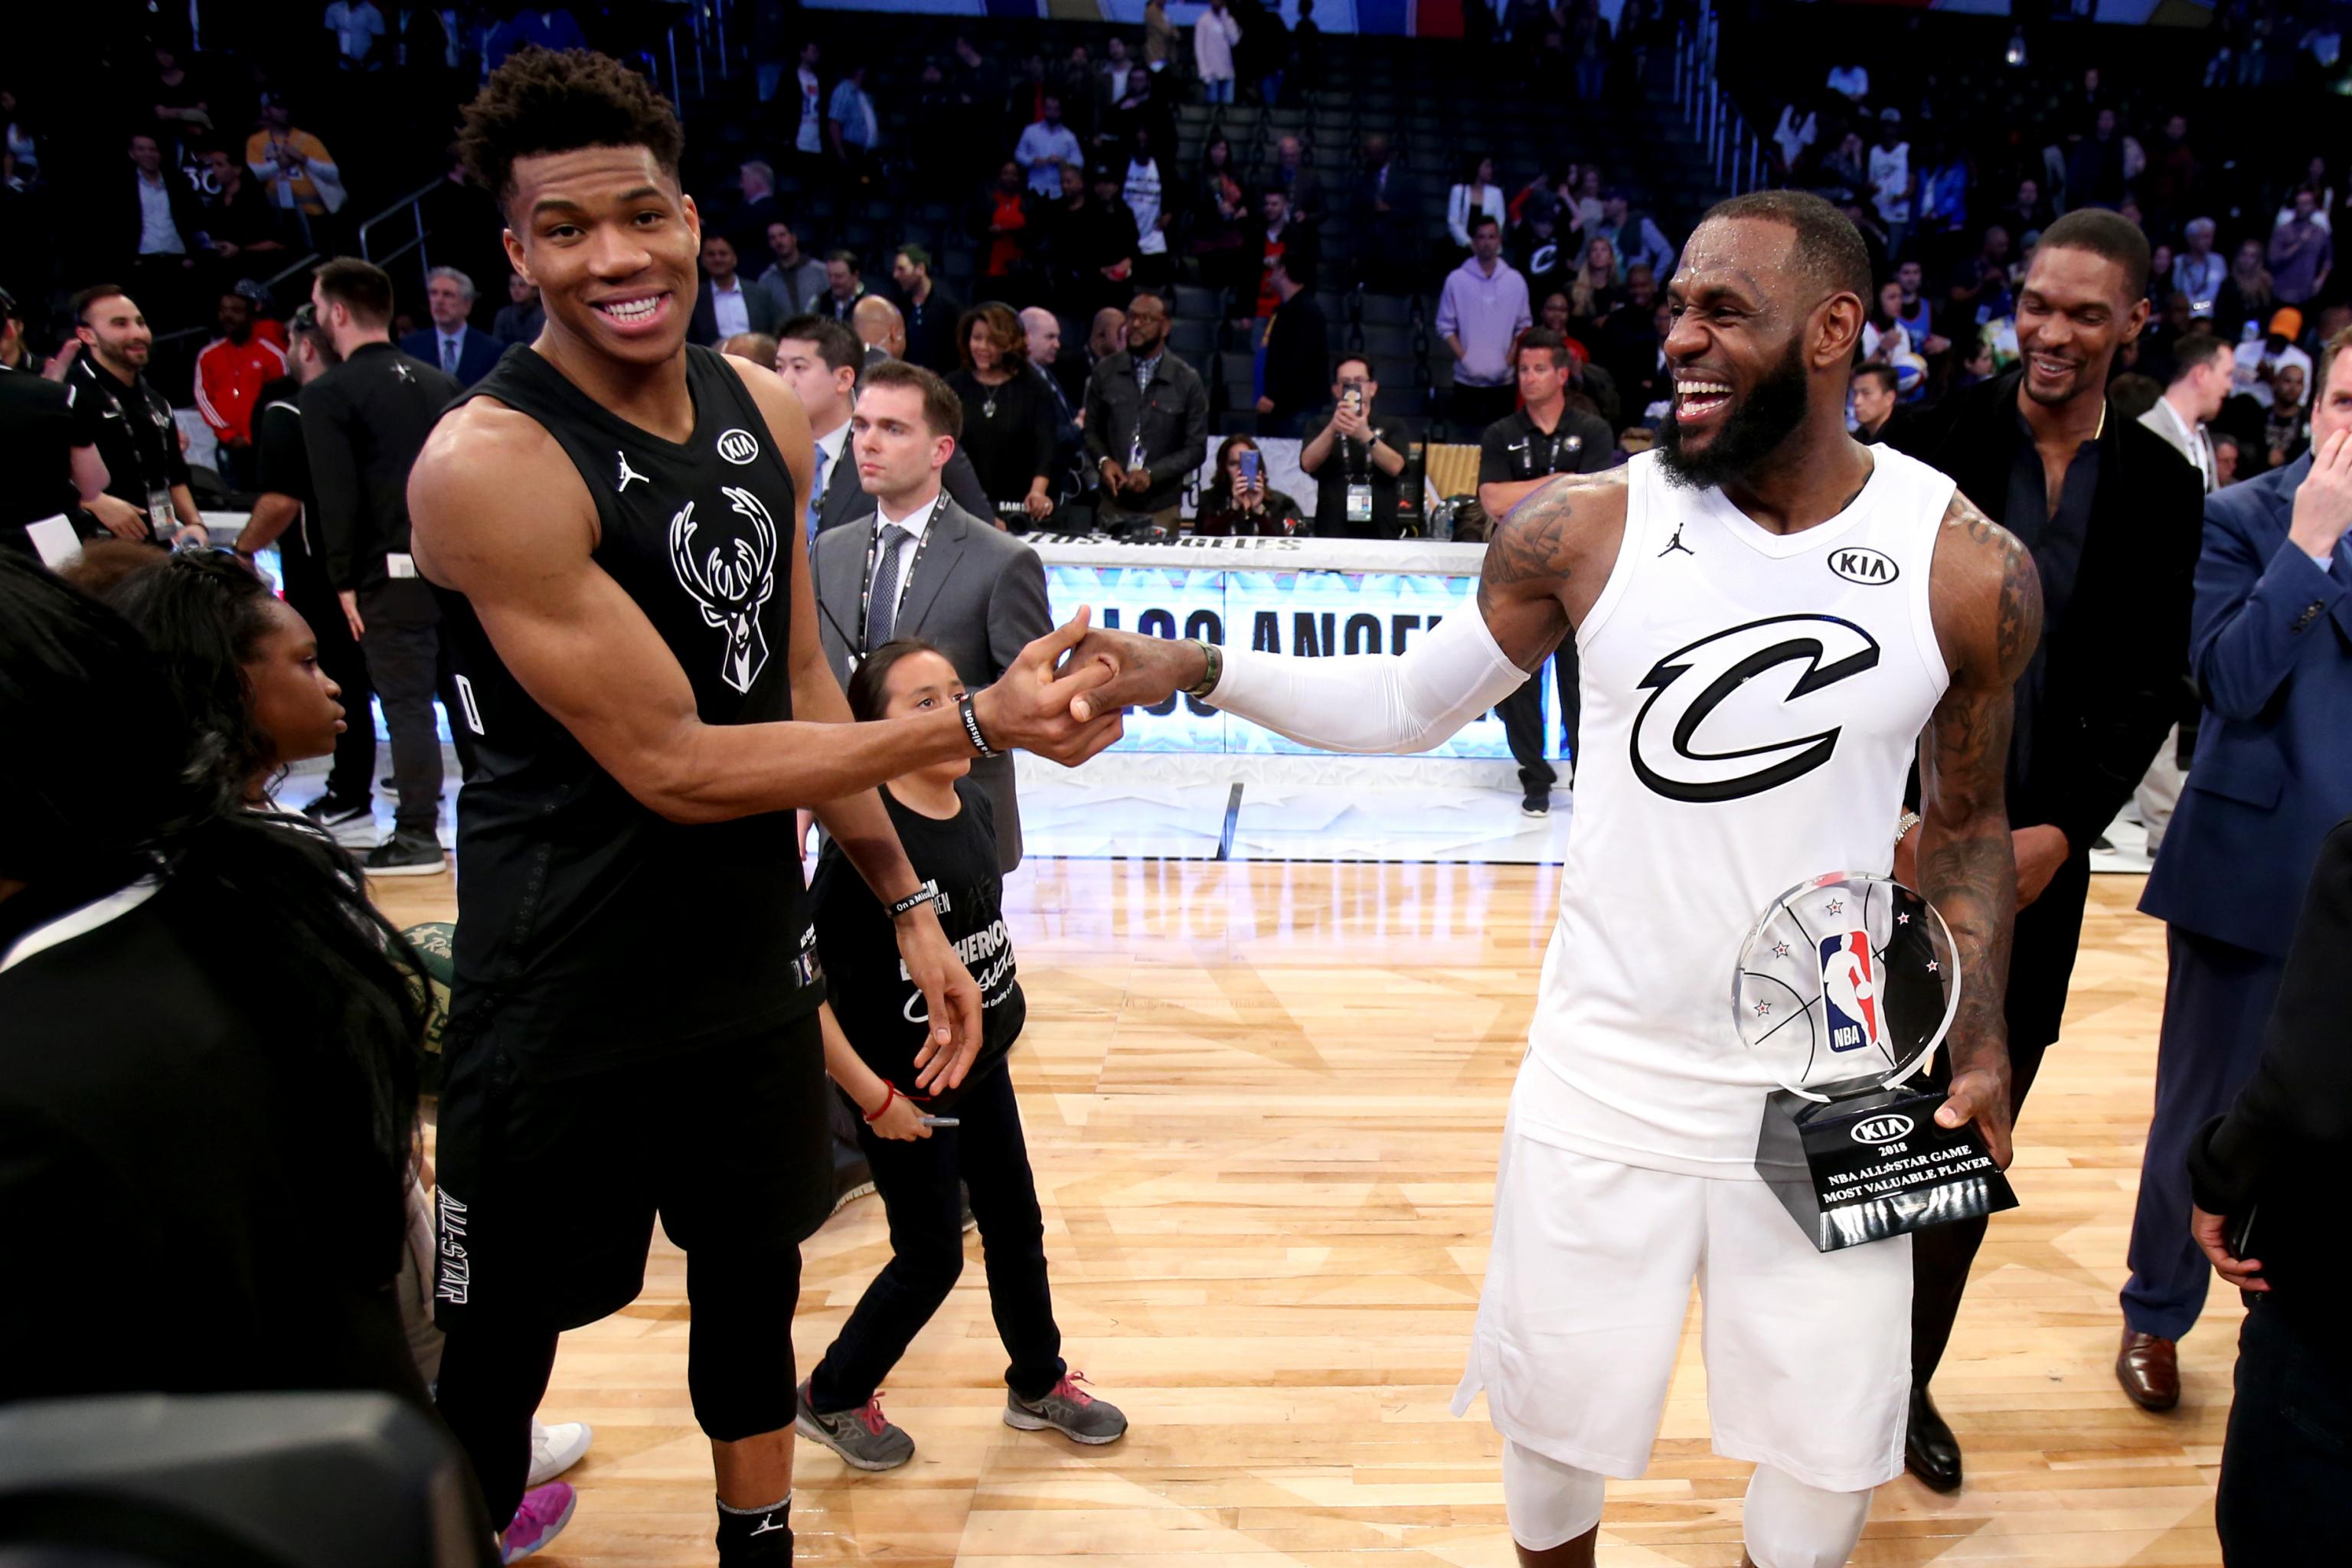 Nba All Star Game 2019 Explaining Draft Format Examining Latest Voting Results Bleacher Report Latest News Videos And Highlights